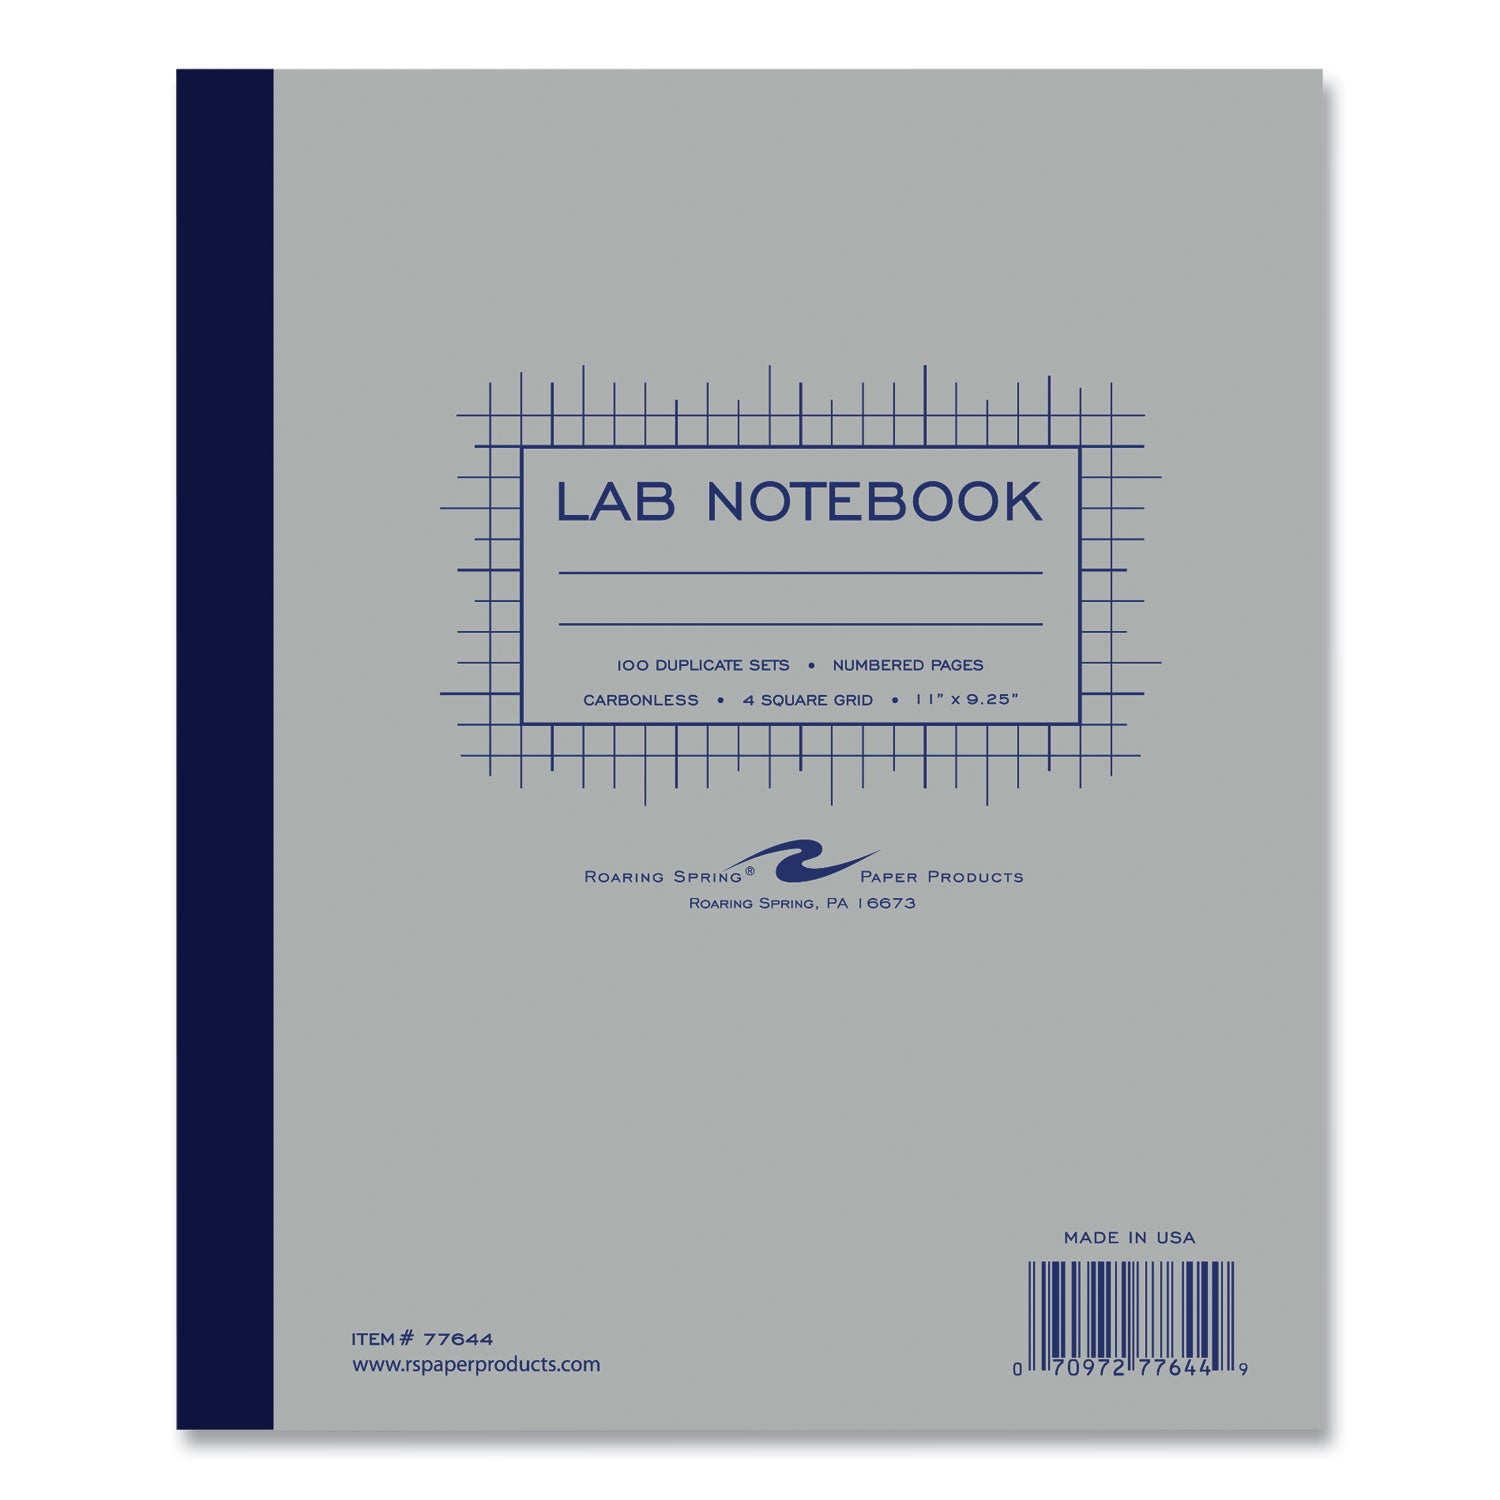 lab-and-science-carbonless-notebook-quad-rule-4-sq-in-gray-cover-200-11-x-925-sheets-5-ctships-in-4-6-business-days_roa77644cs - 2